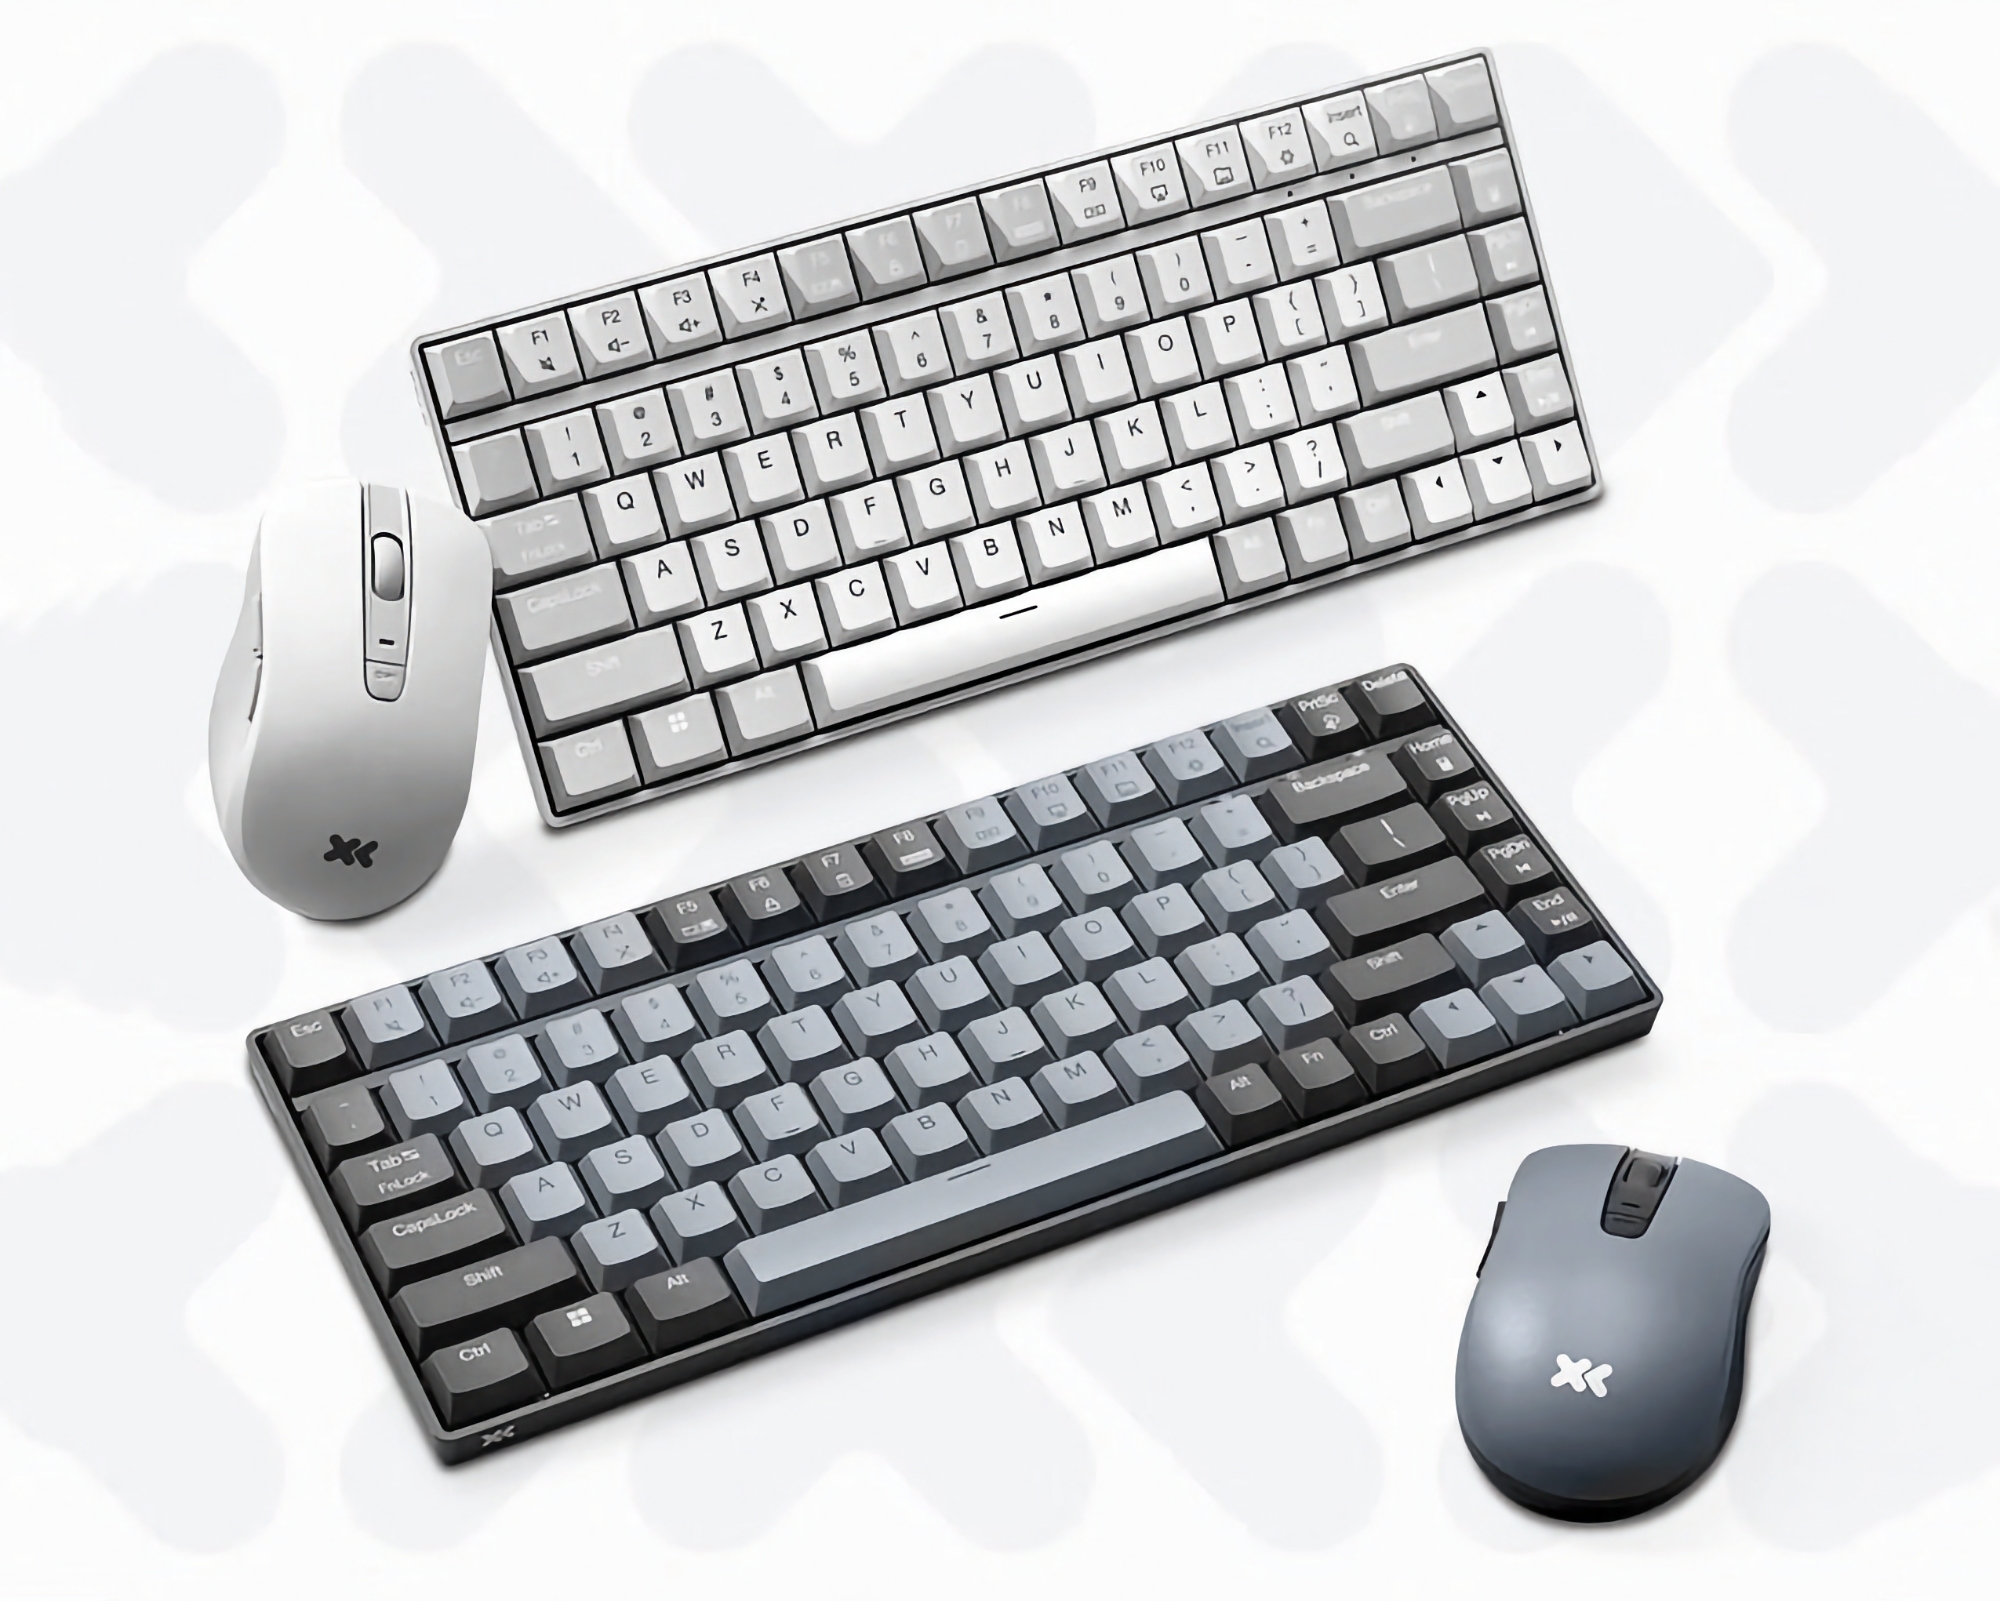 Budget kit: Lenovo unveiled a wireless keyboard and mouse for $21